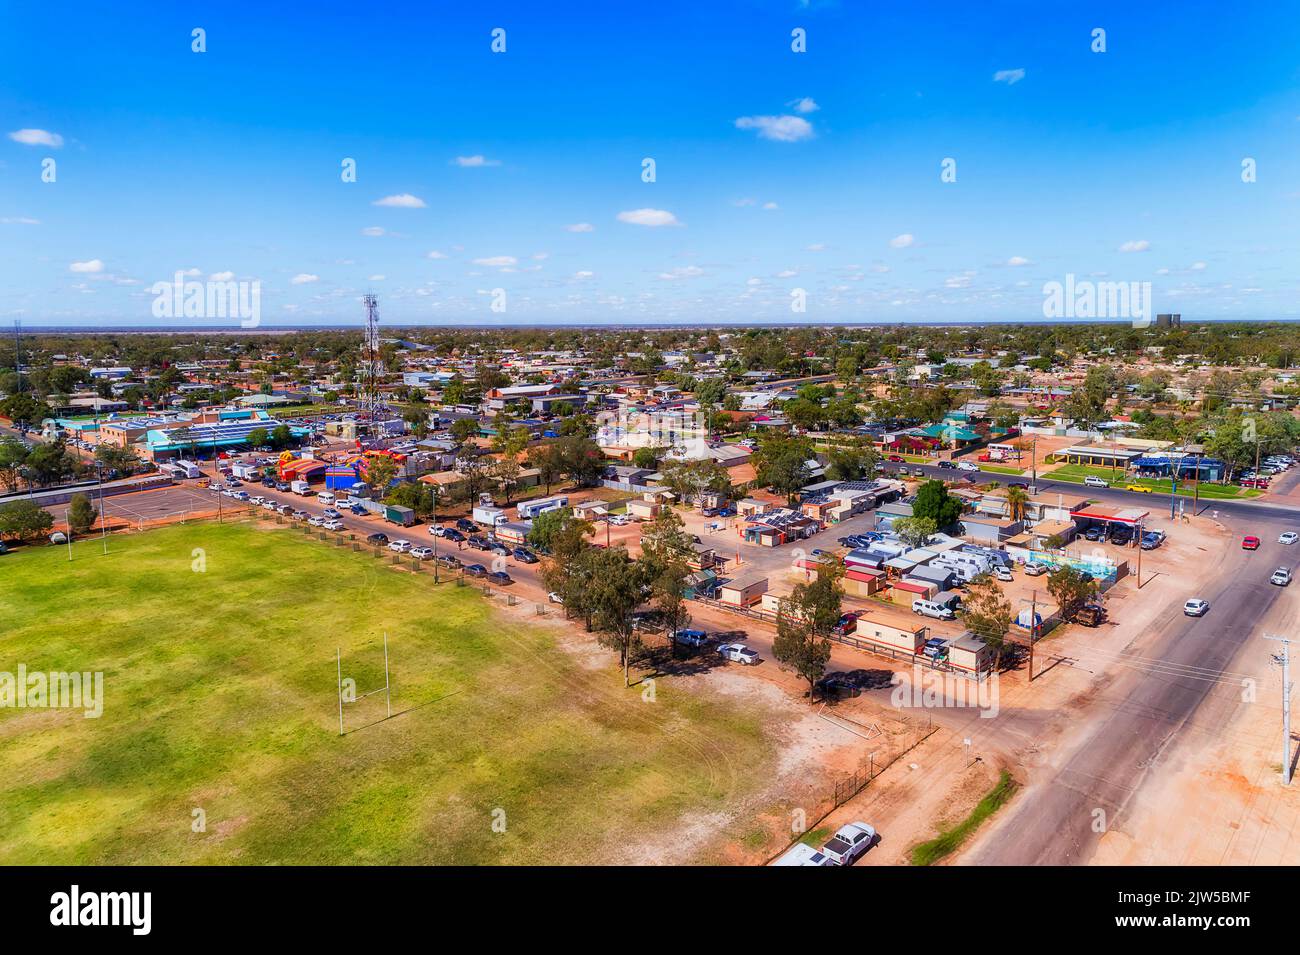 Downtown of Lightning Ridge opal mining town in rural regional outback of NSW, Australia - aerial townscape view. Stock Photo